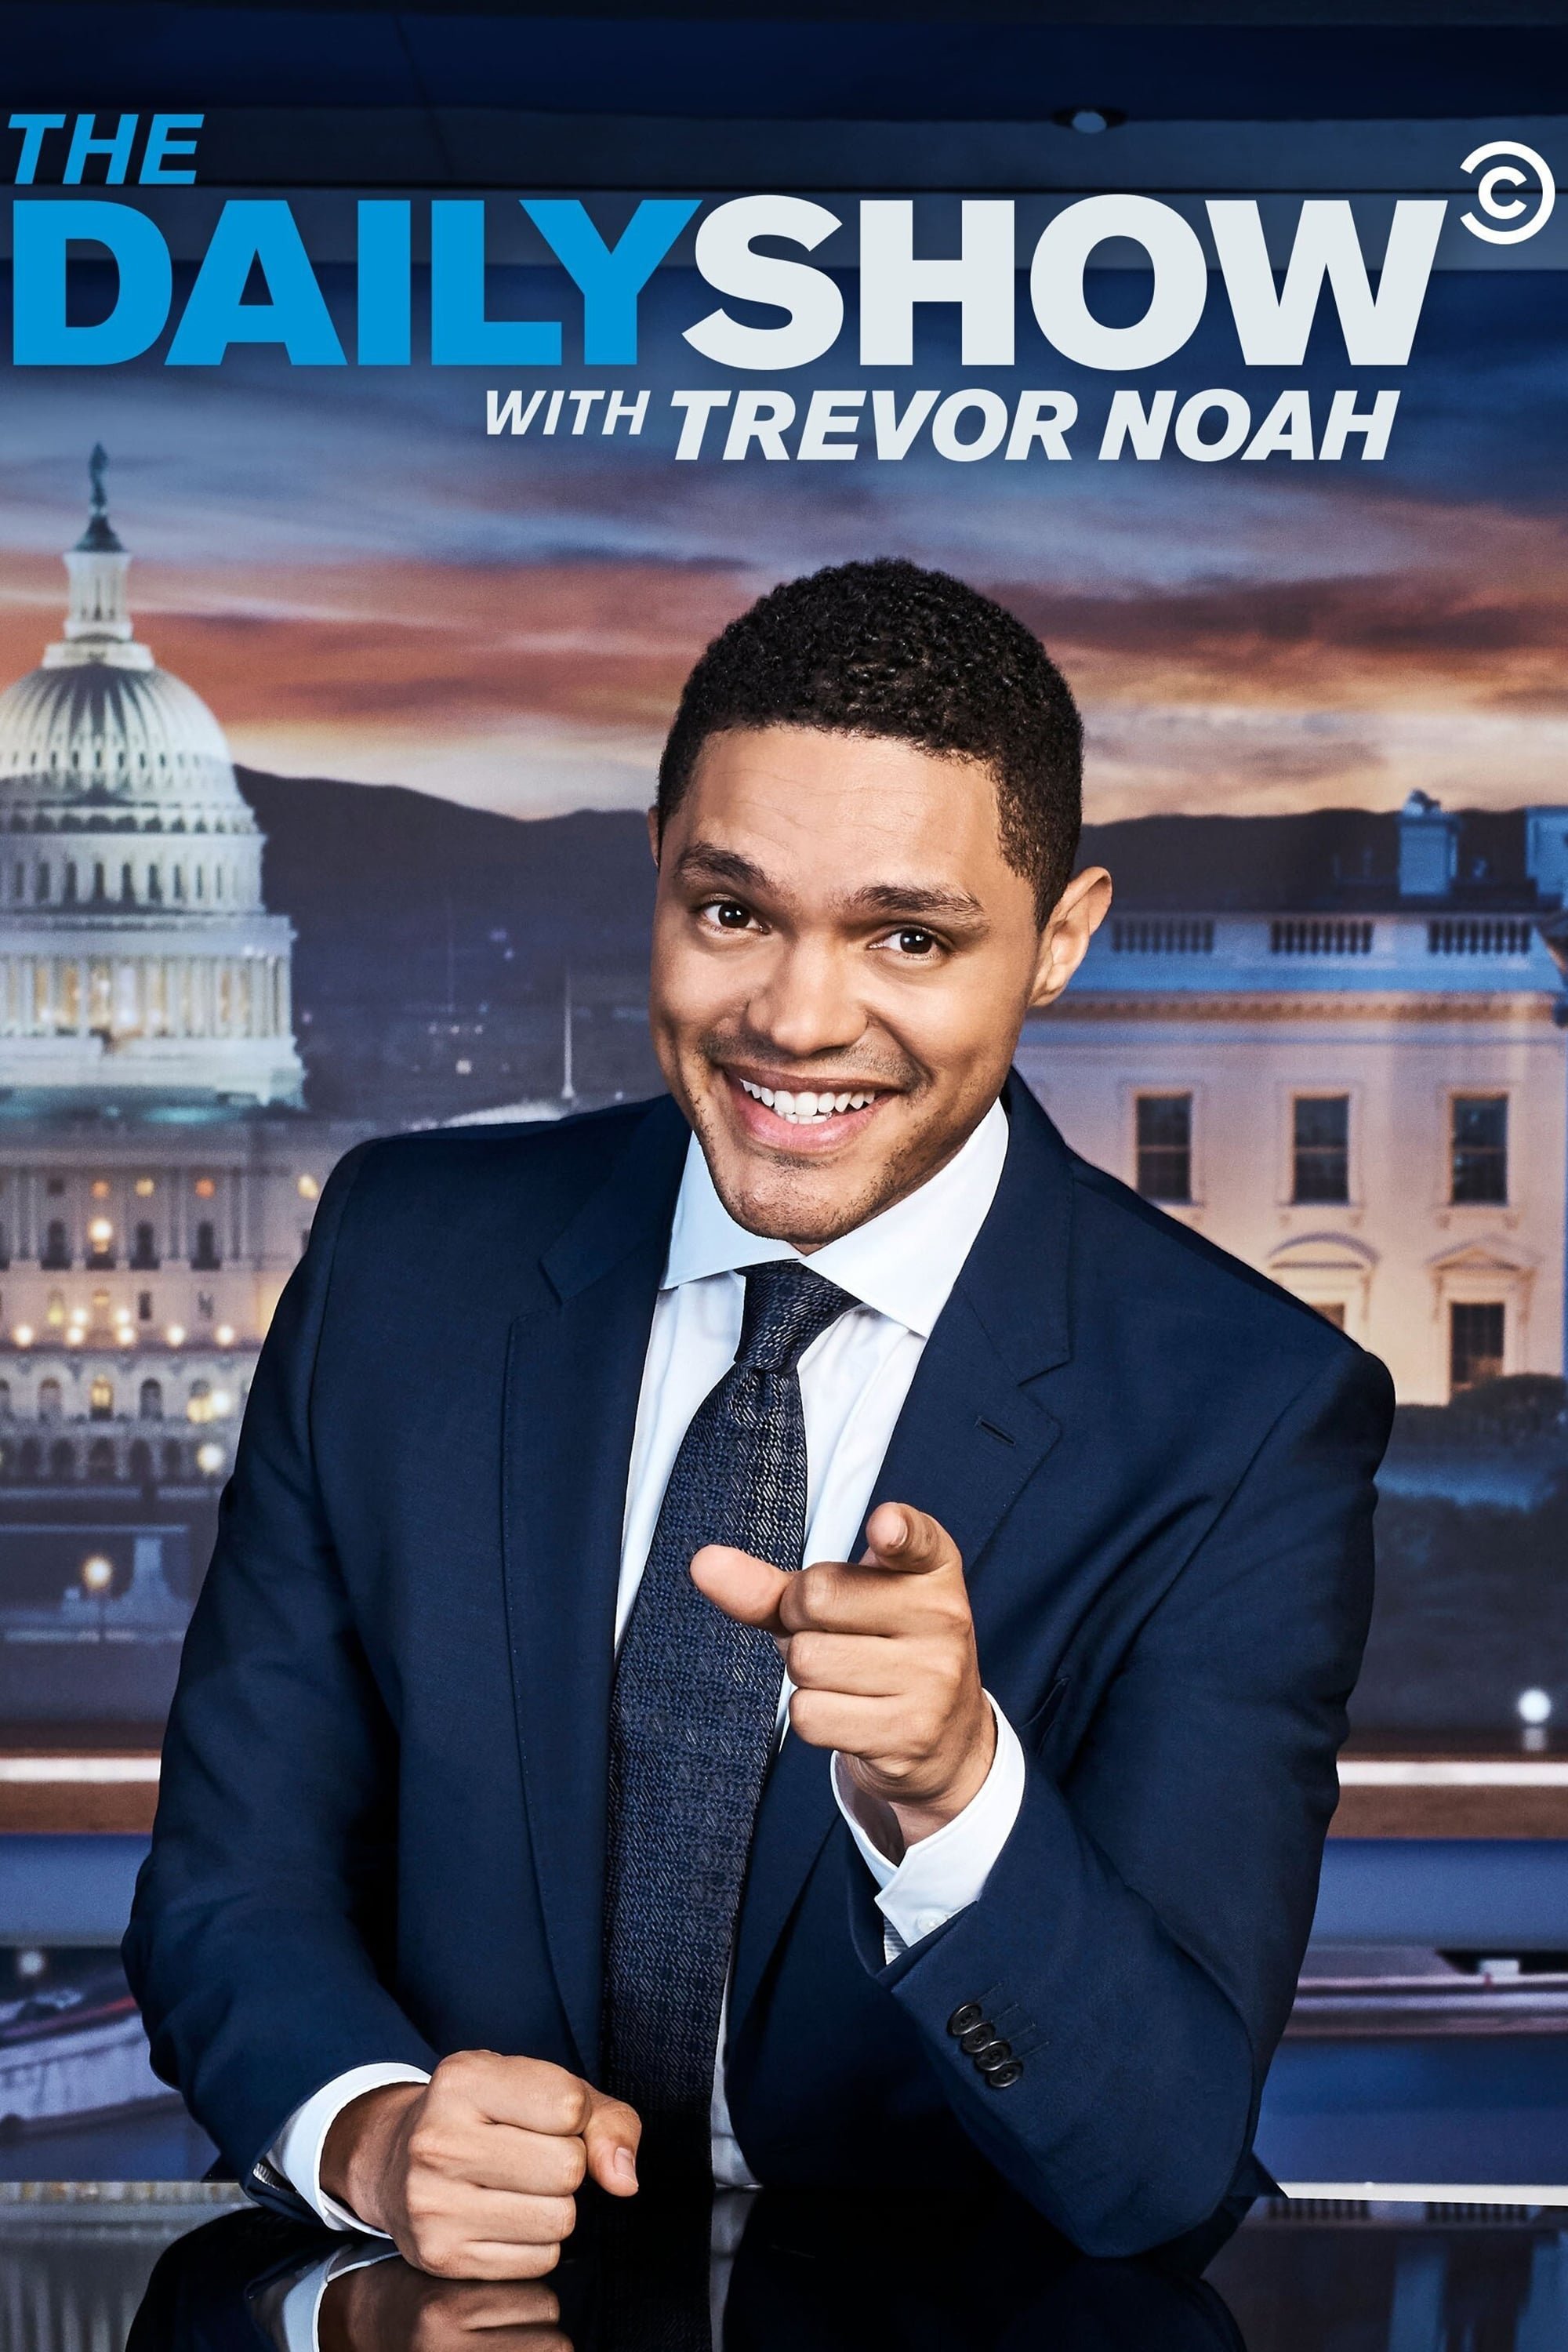 The Daily Show.jpg